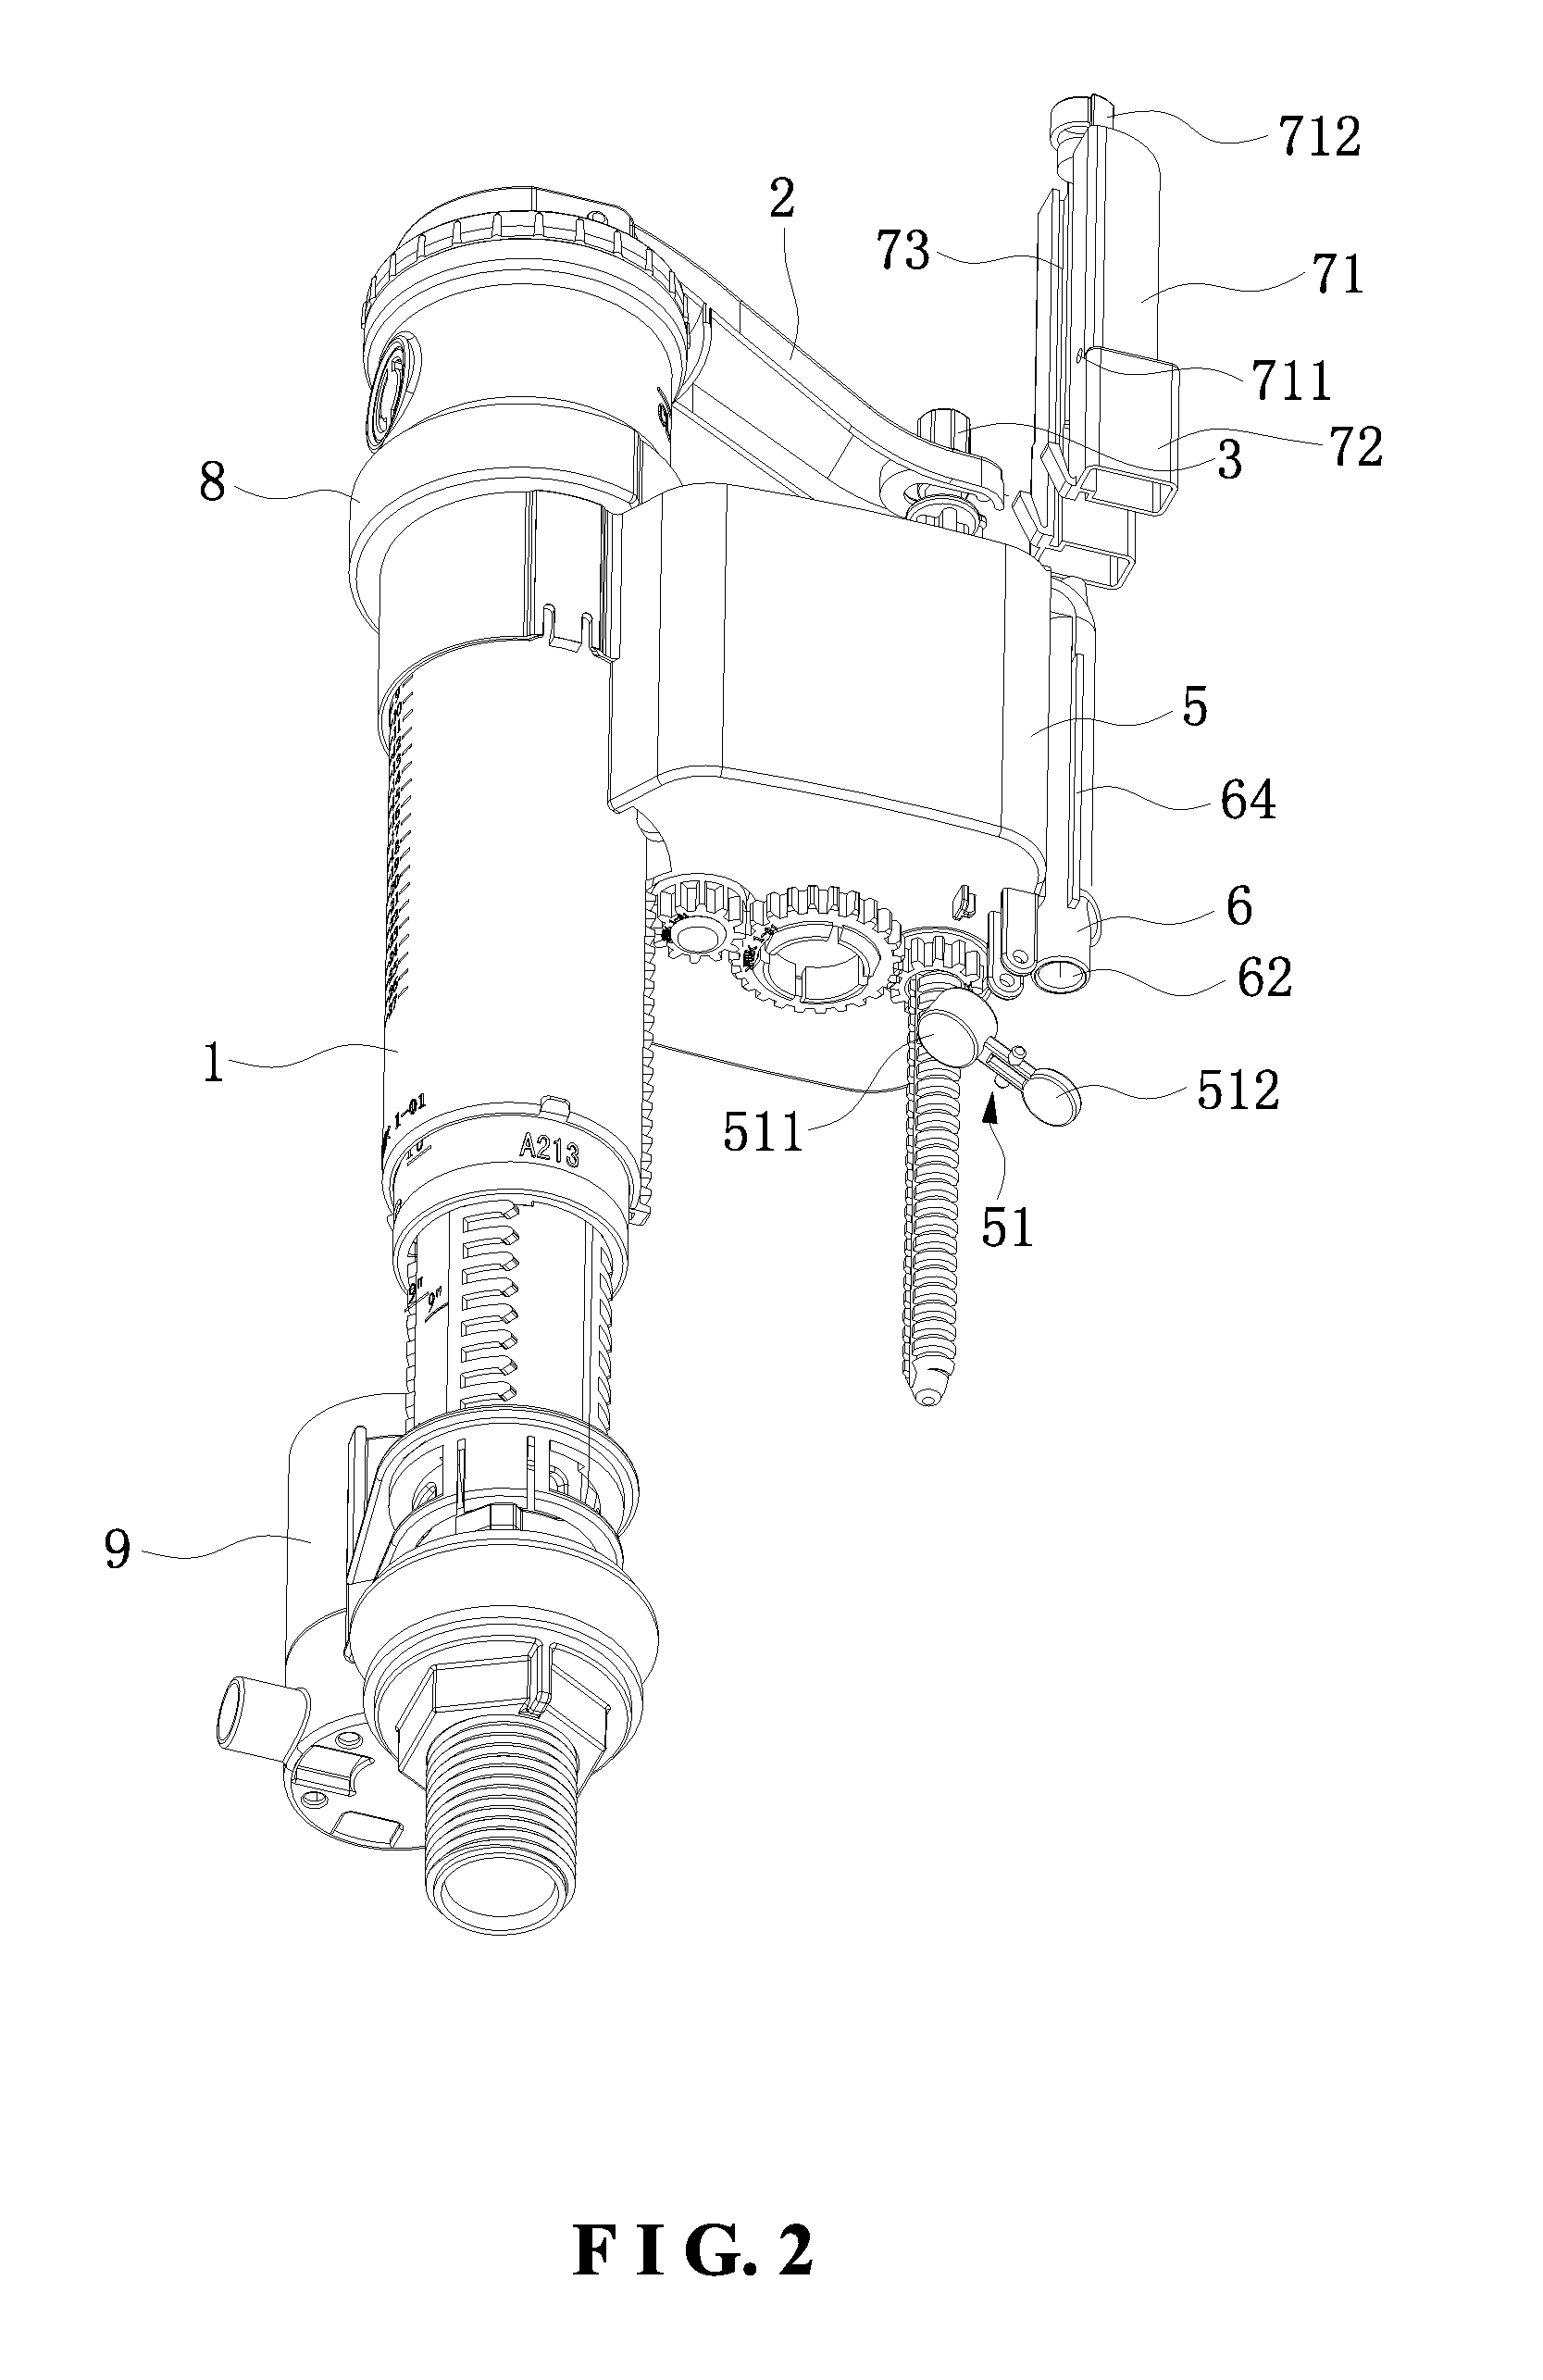 Minor water leak prevention apparatus for water inlet valve